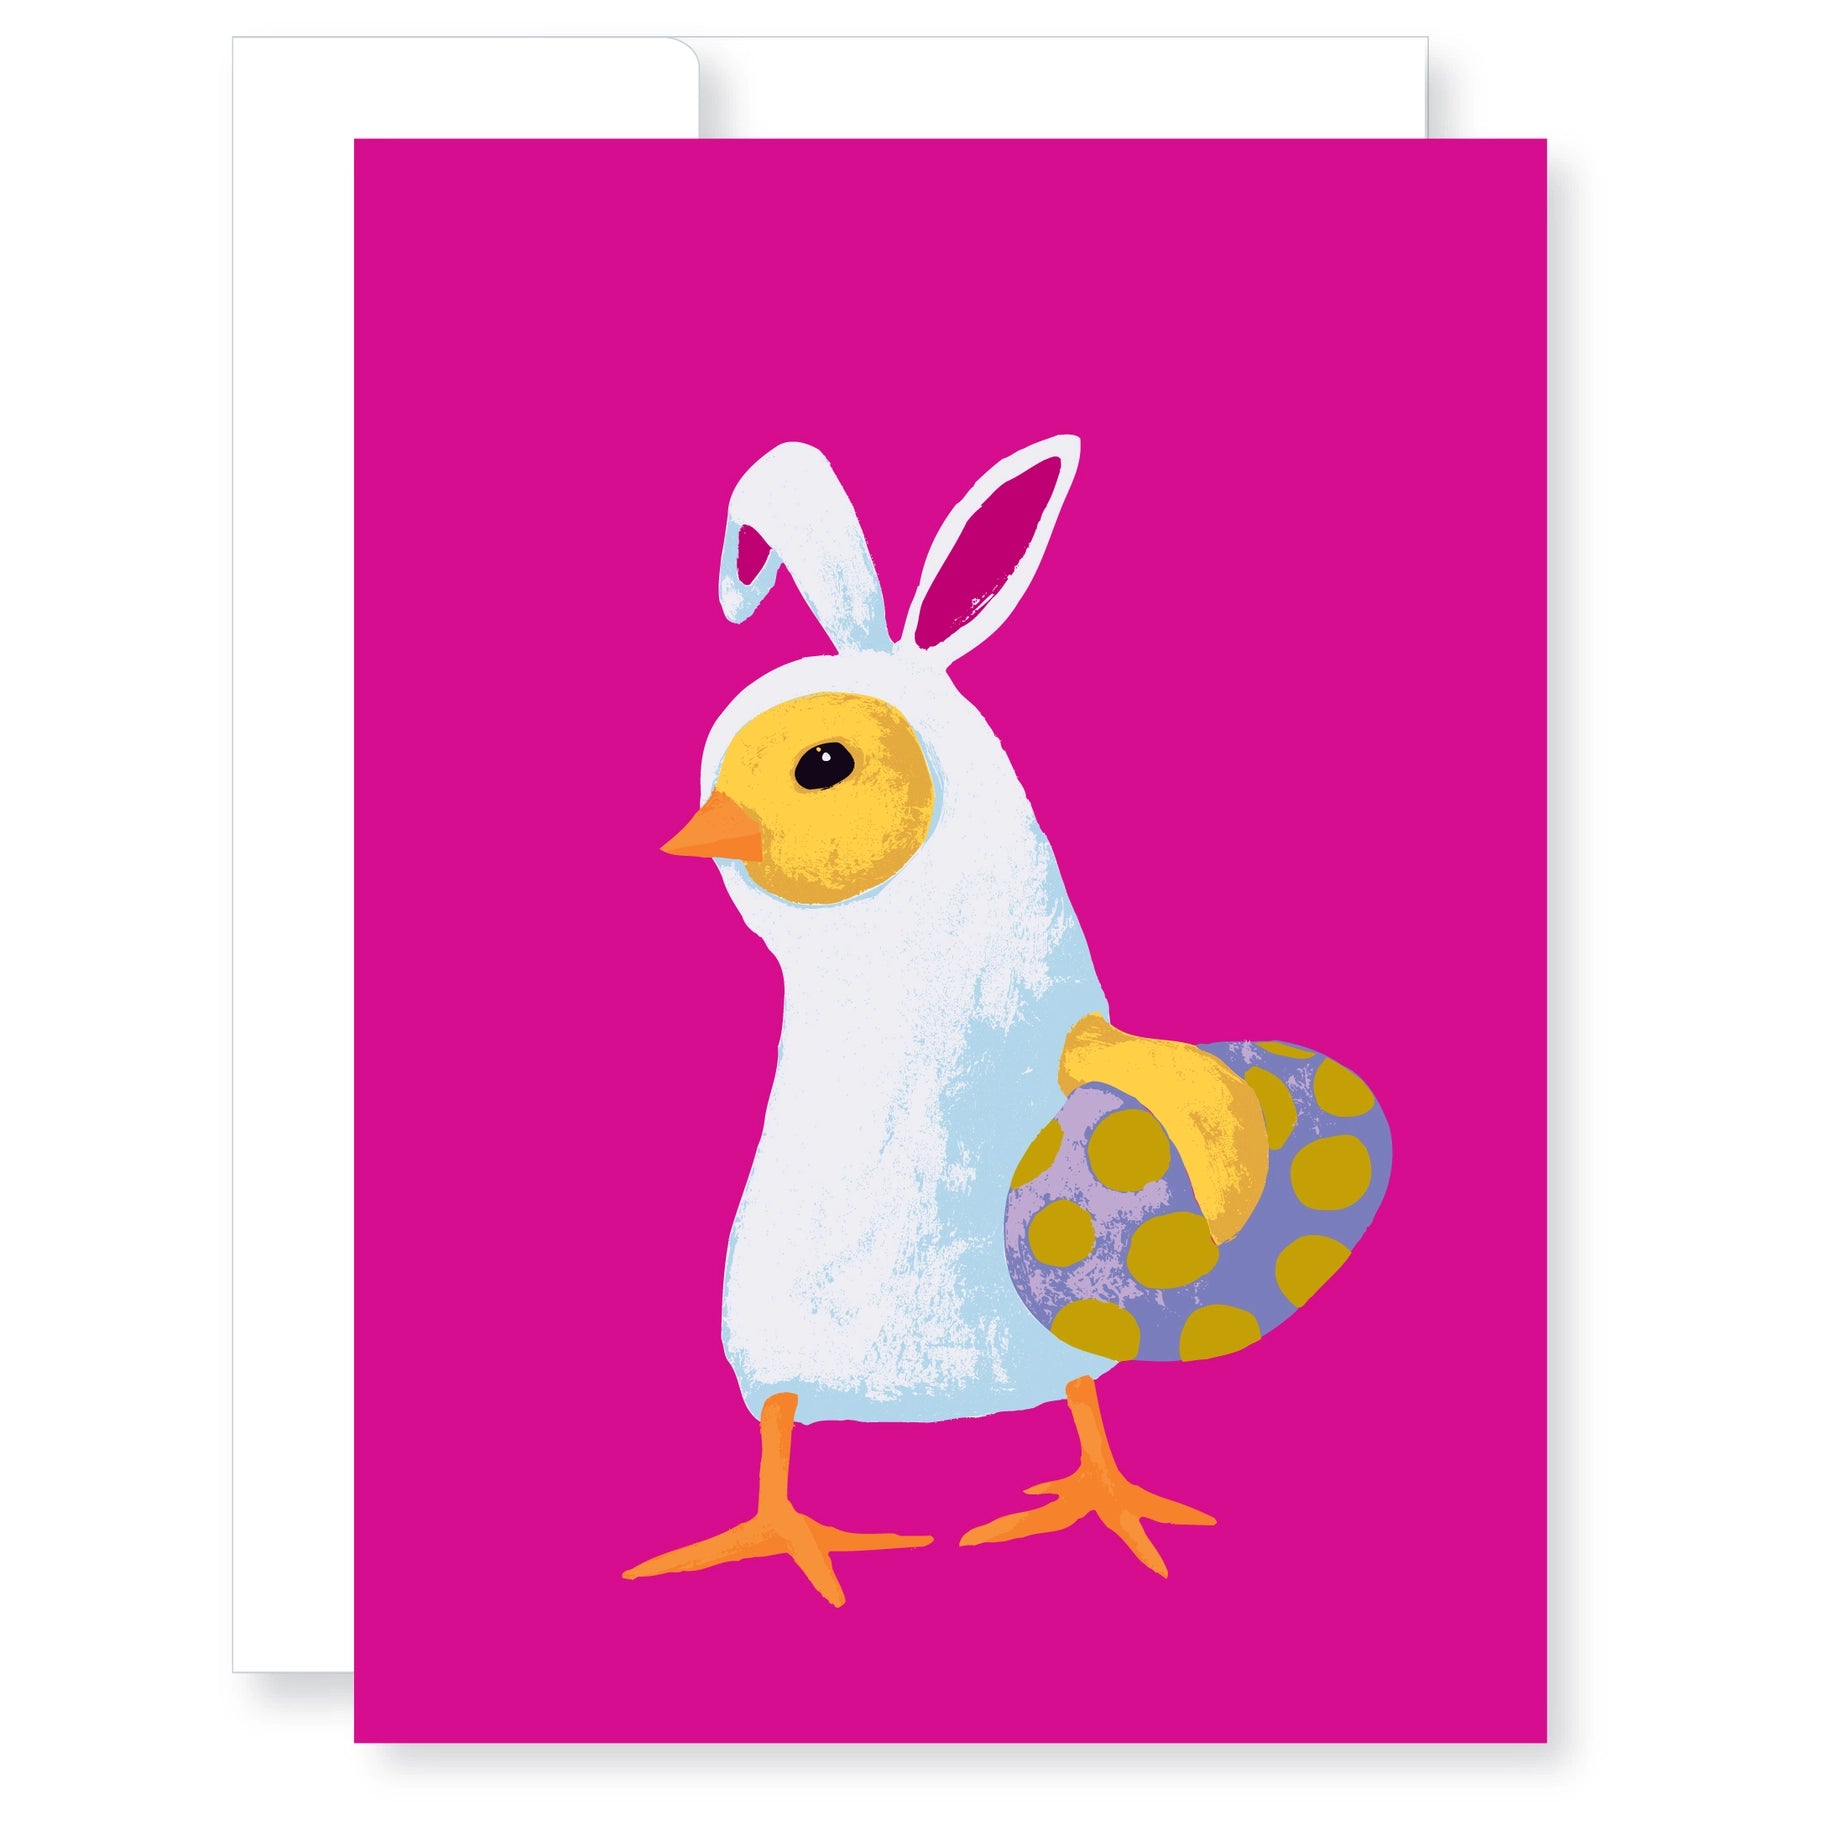 Easter Card Collection